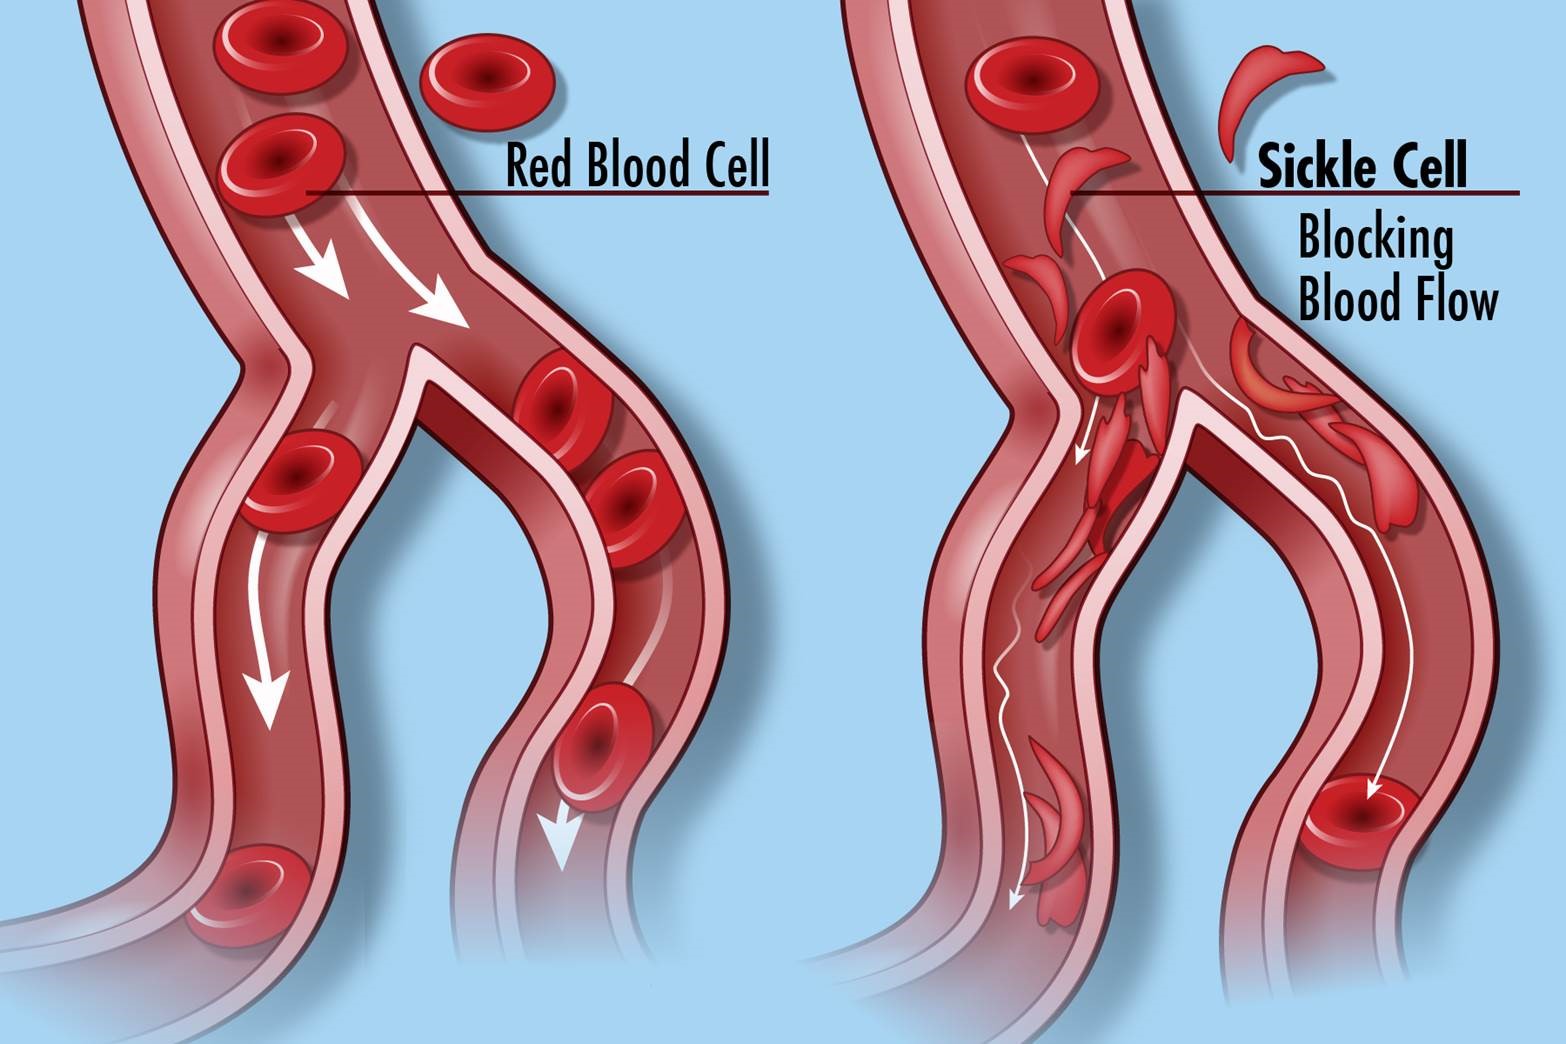 Two blood vessels, in tones of red, on blue background ... one shows normal red blood cells, the other shows sickle cells blocking the blood flow